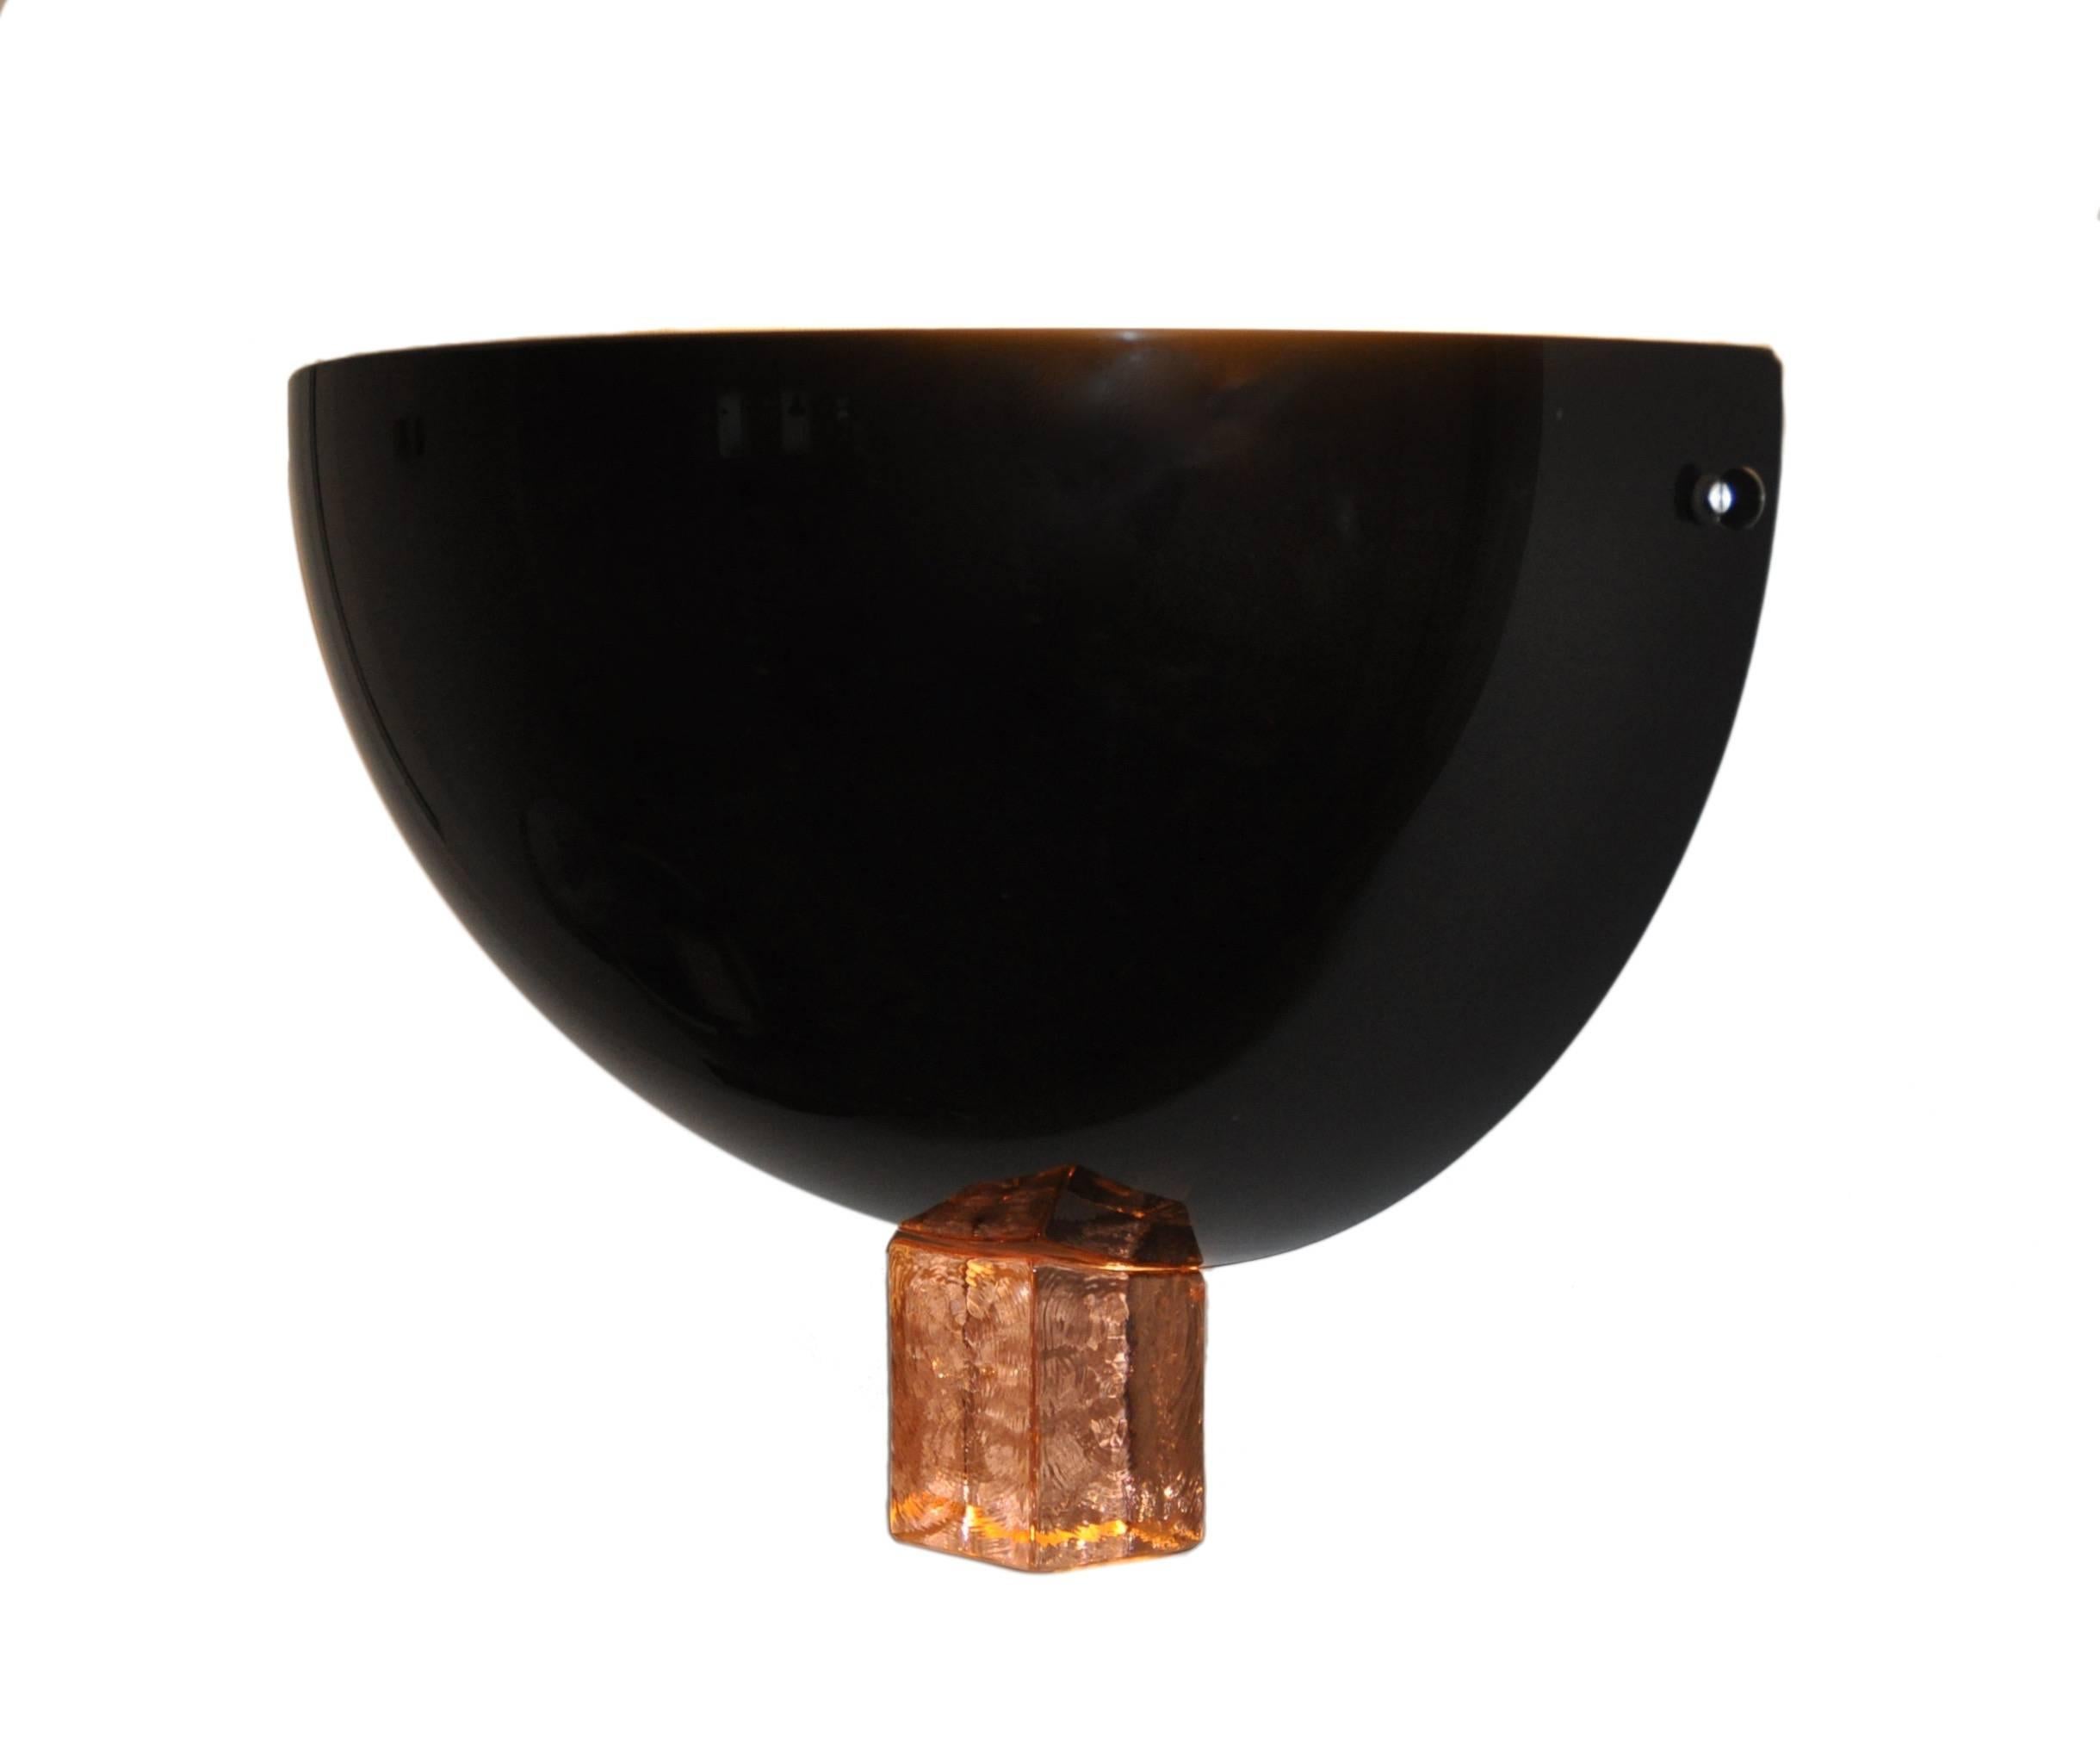 The appliques presented here were produced in two sizes this edition the biggest of the two, measuring an impressive 15.3/4″ width in black opaque glass. When the lamp is lit the light reflects across the supporting wall and through the orange